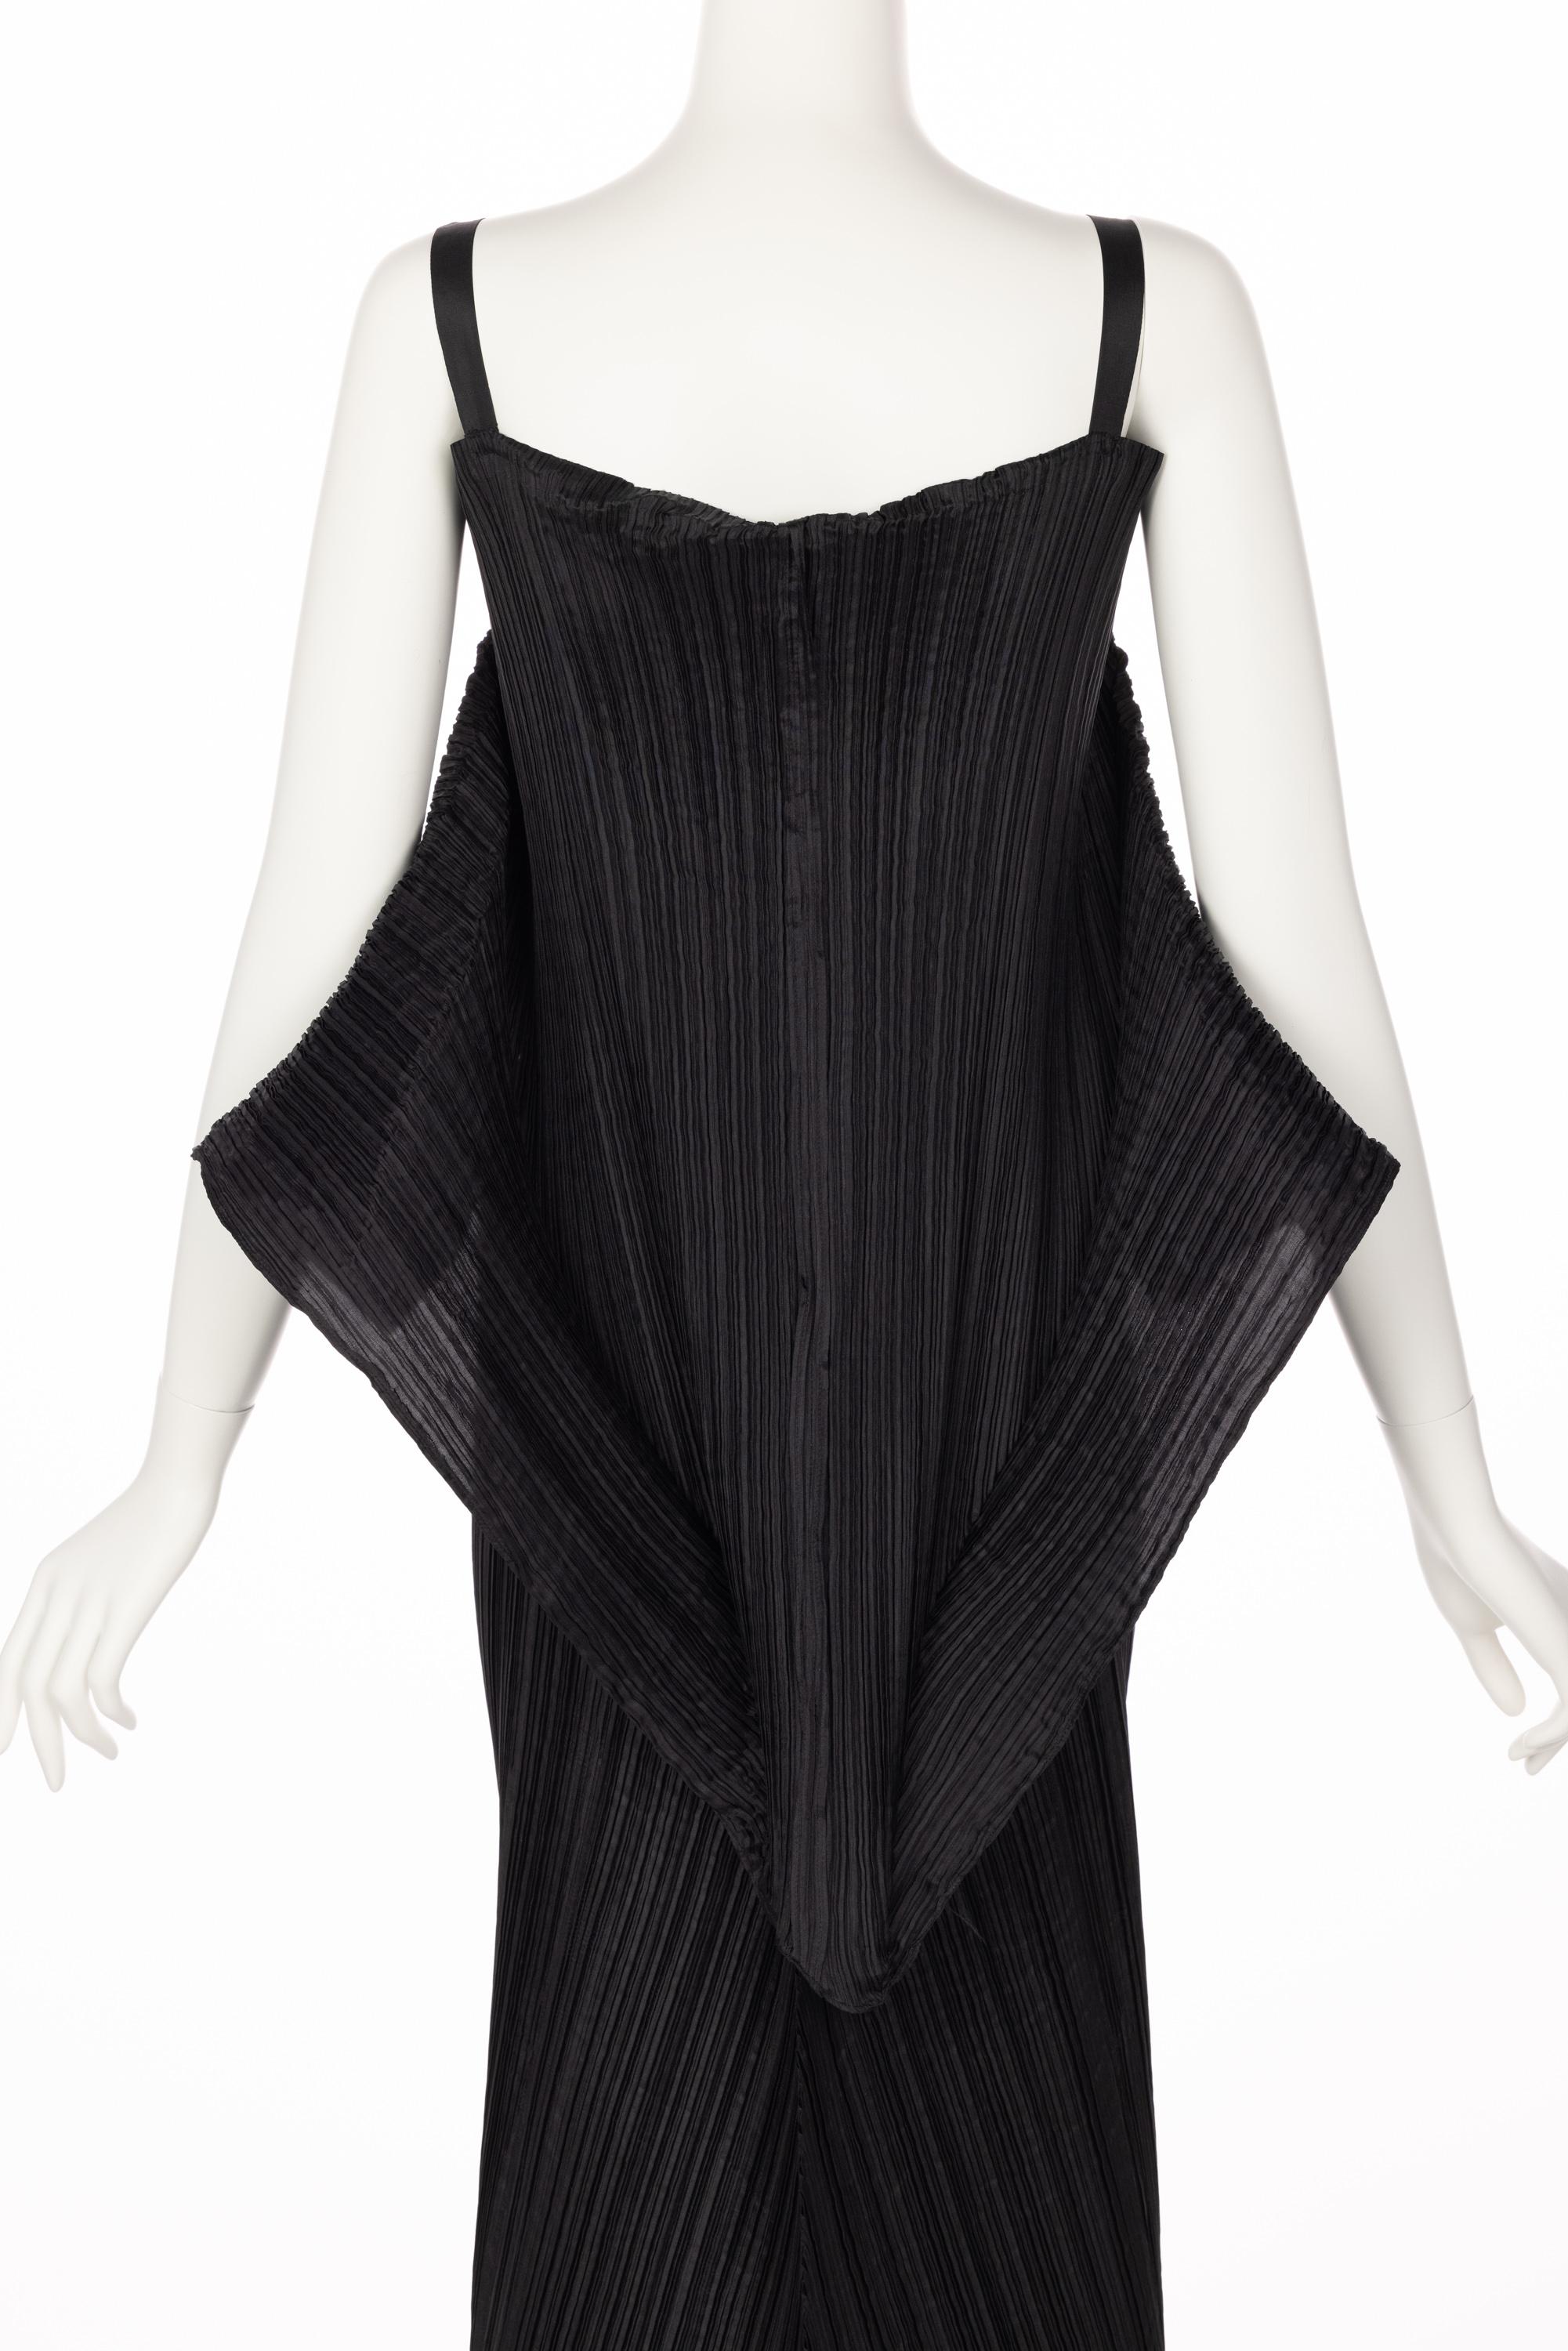 Issey Miyake Black Pleated Sculptural Sleeveless Maxi Dress, 1990s For Sale 6